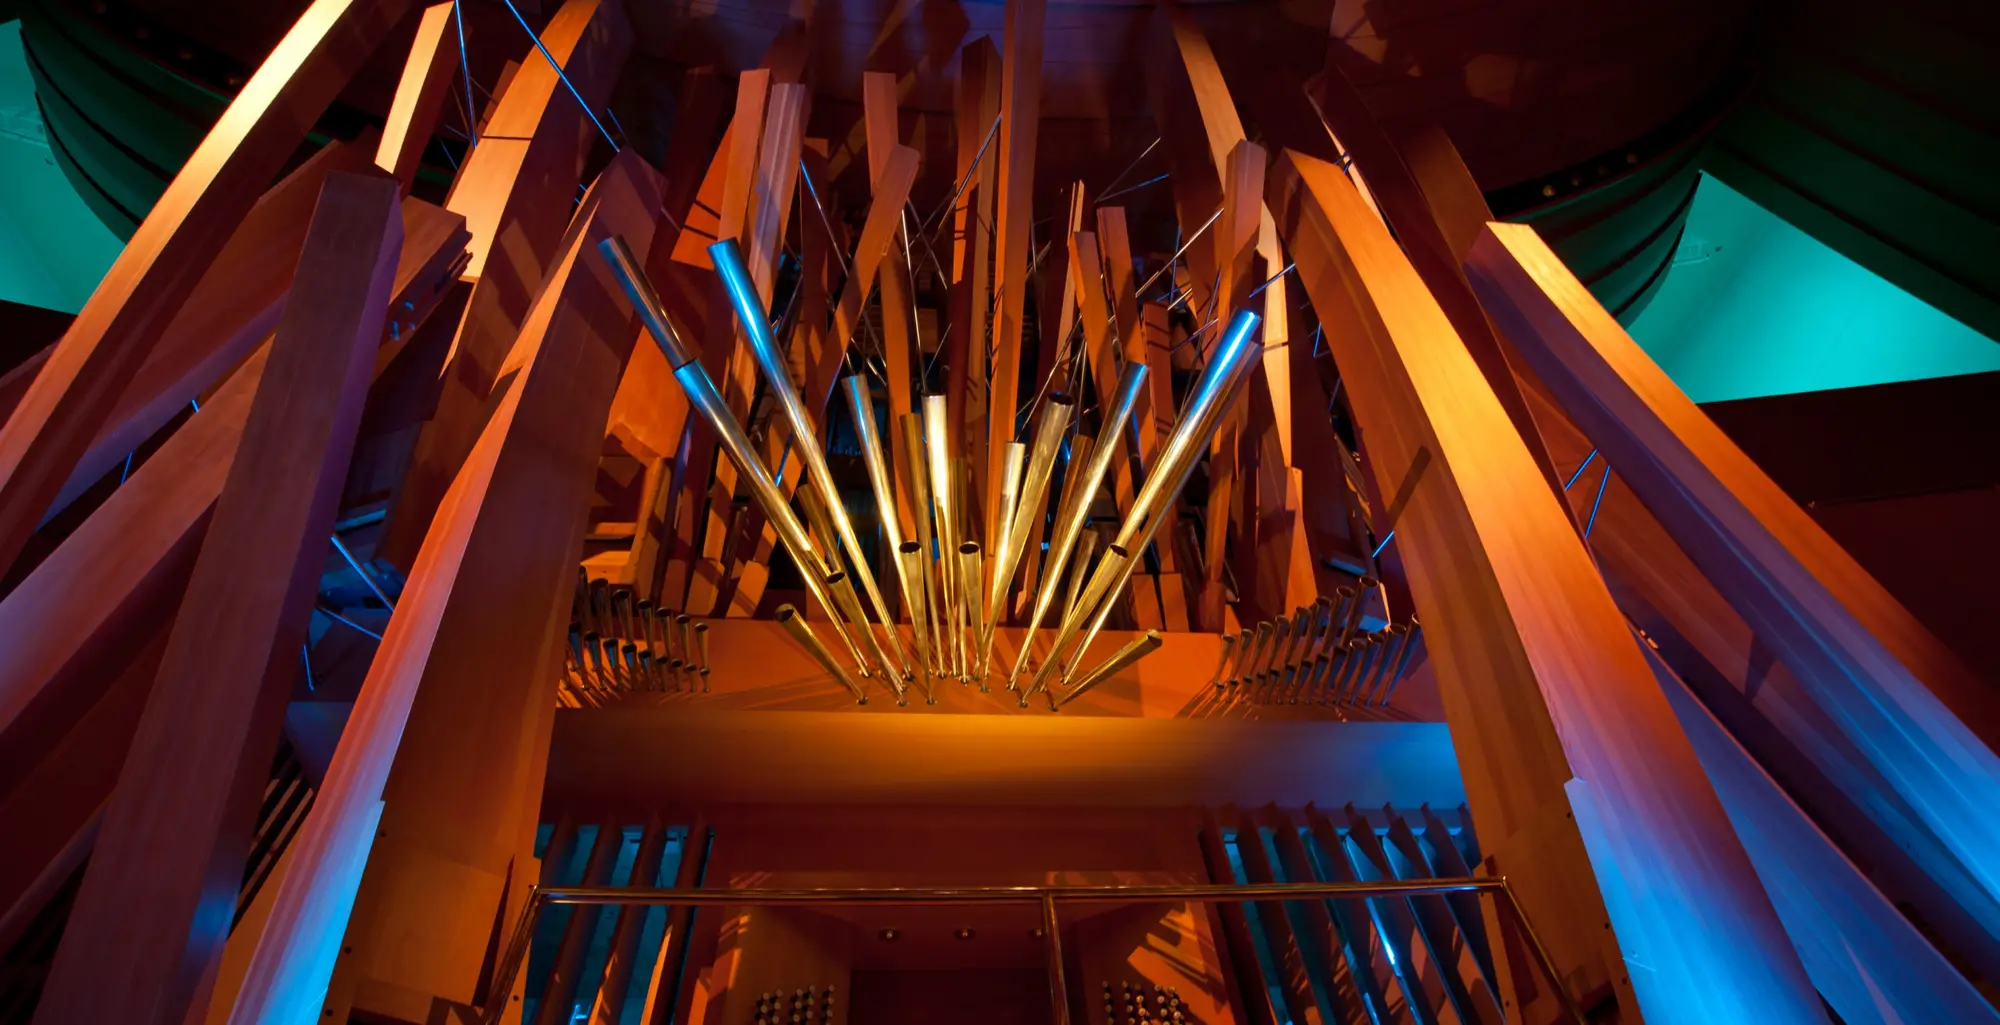 A close-up photograph of the Walt Disney Concert Hall organ, with its pipes in wood and in metal playfully arrayed, awash in bright, colorful lighting